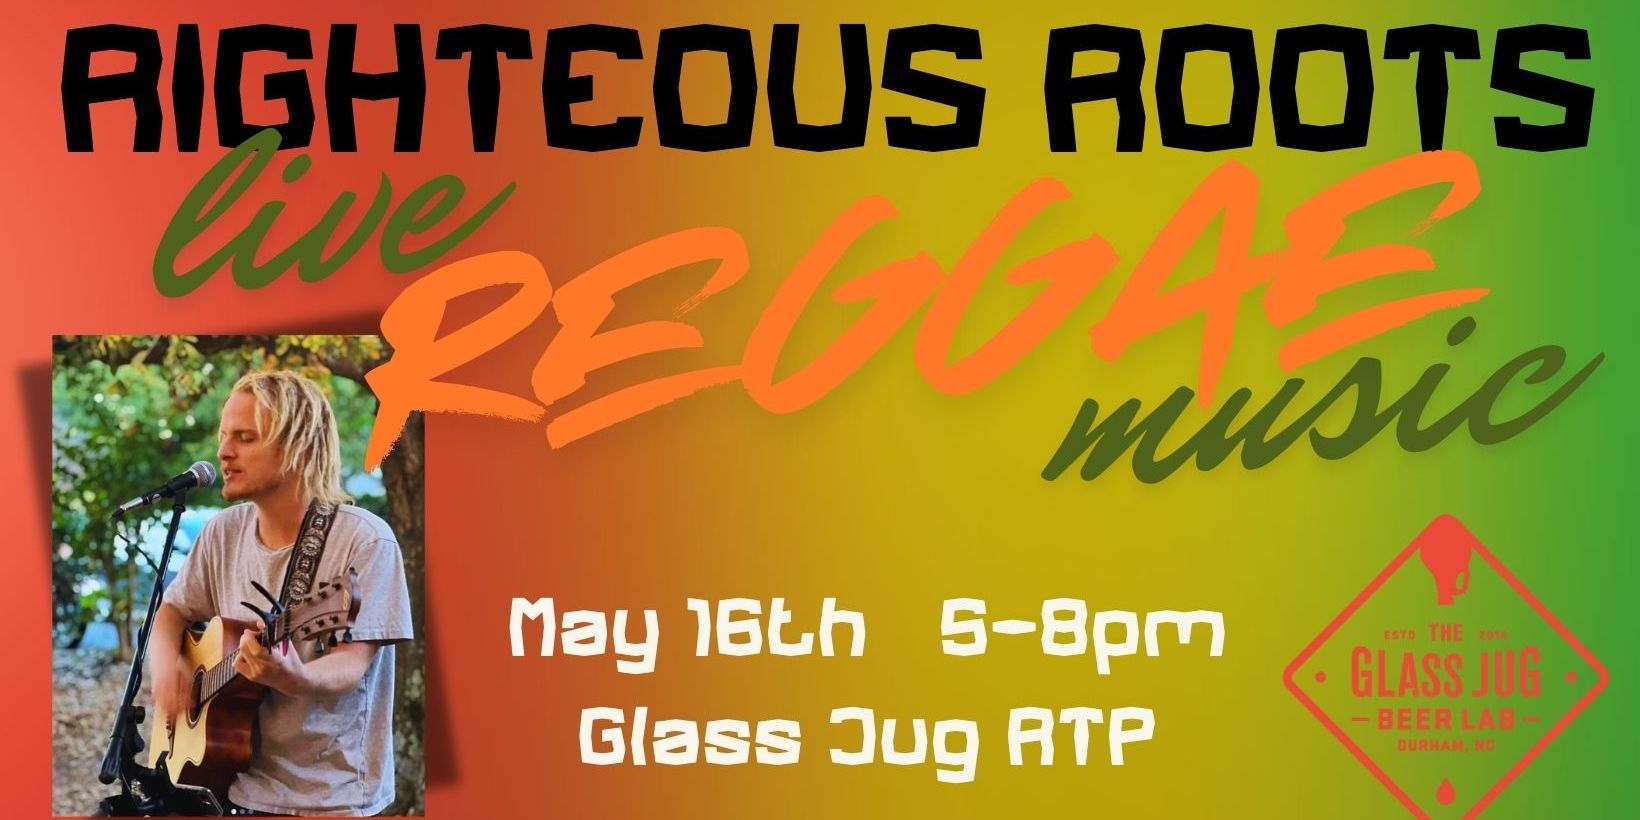 Righteous Roots Reggae Music Show promotional image